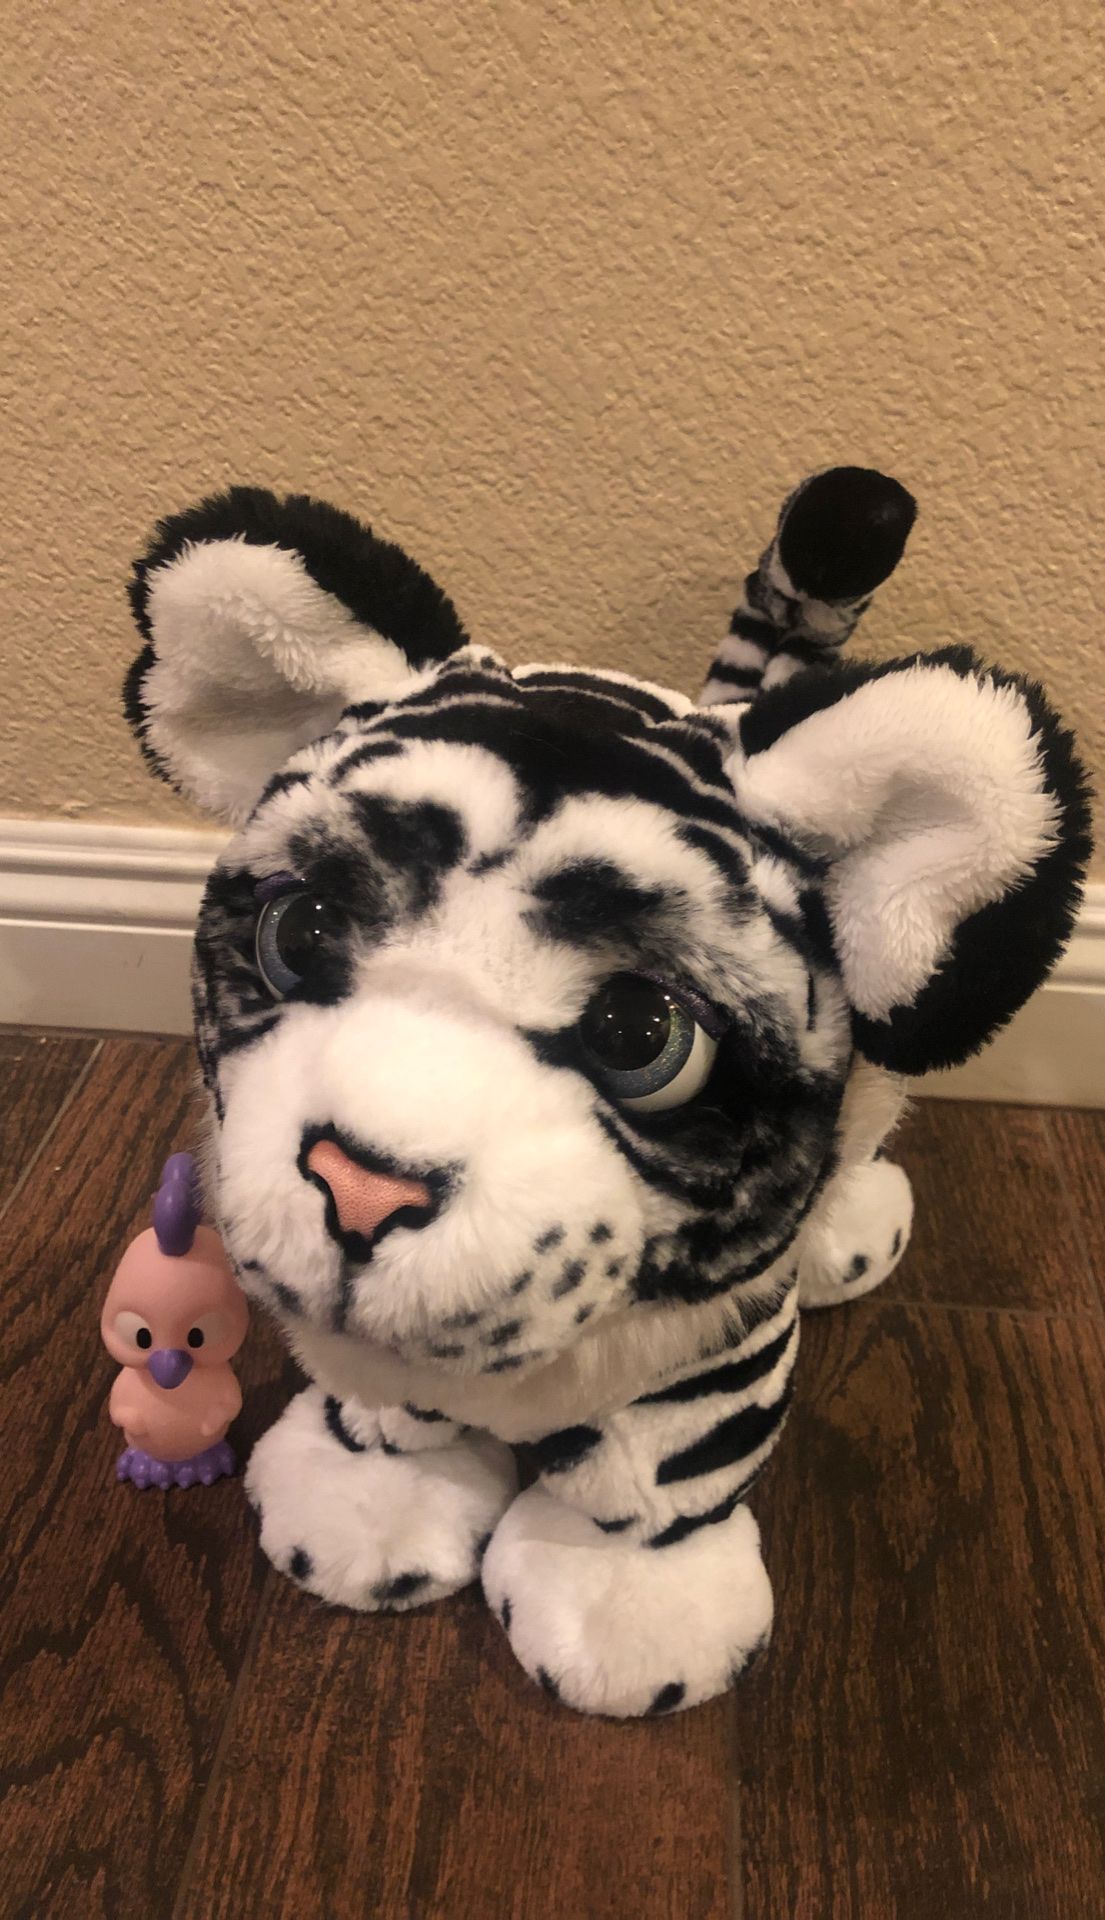 Furreal friends white tiger special edition